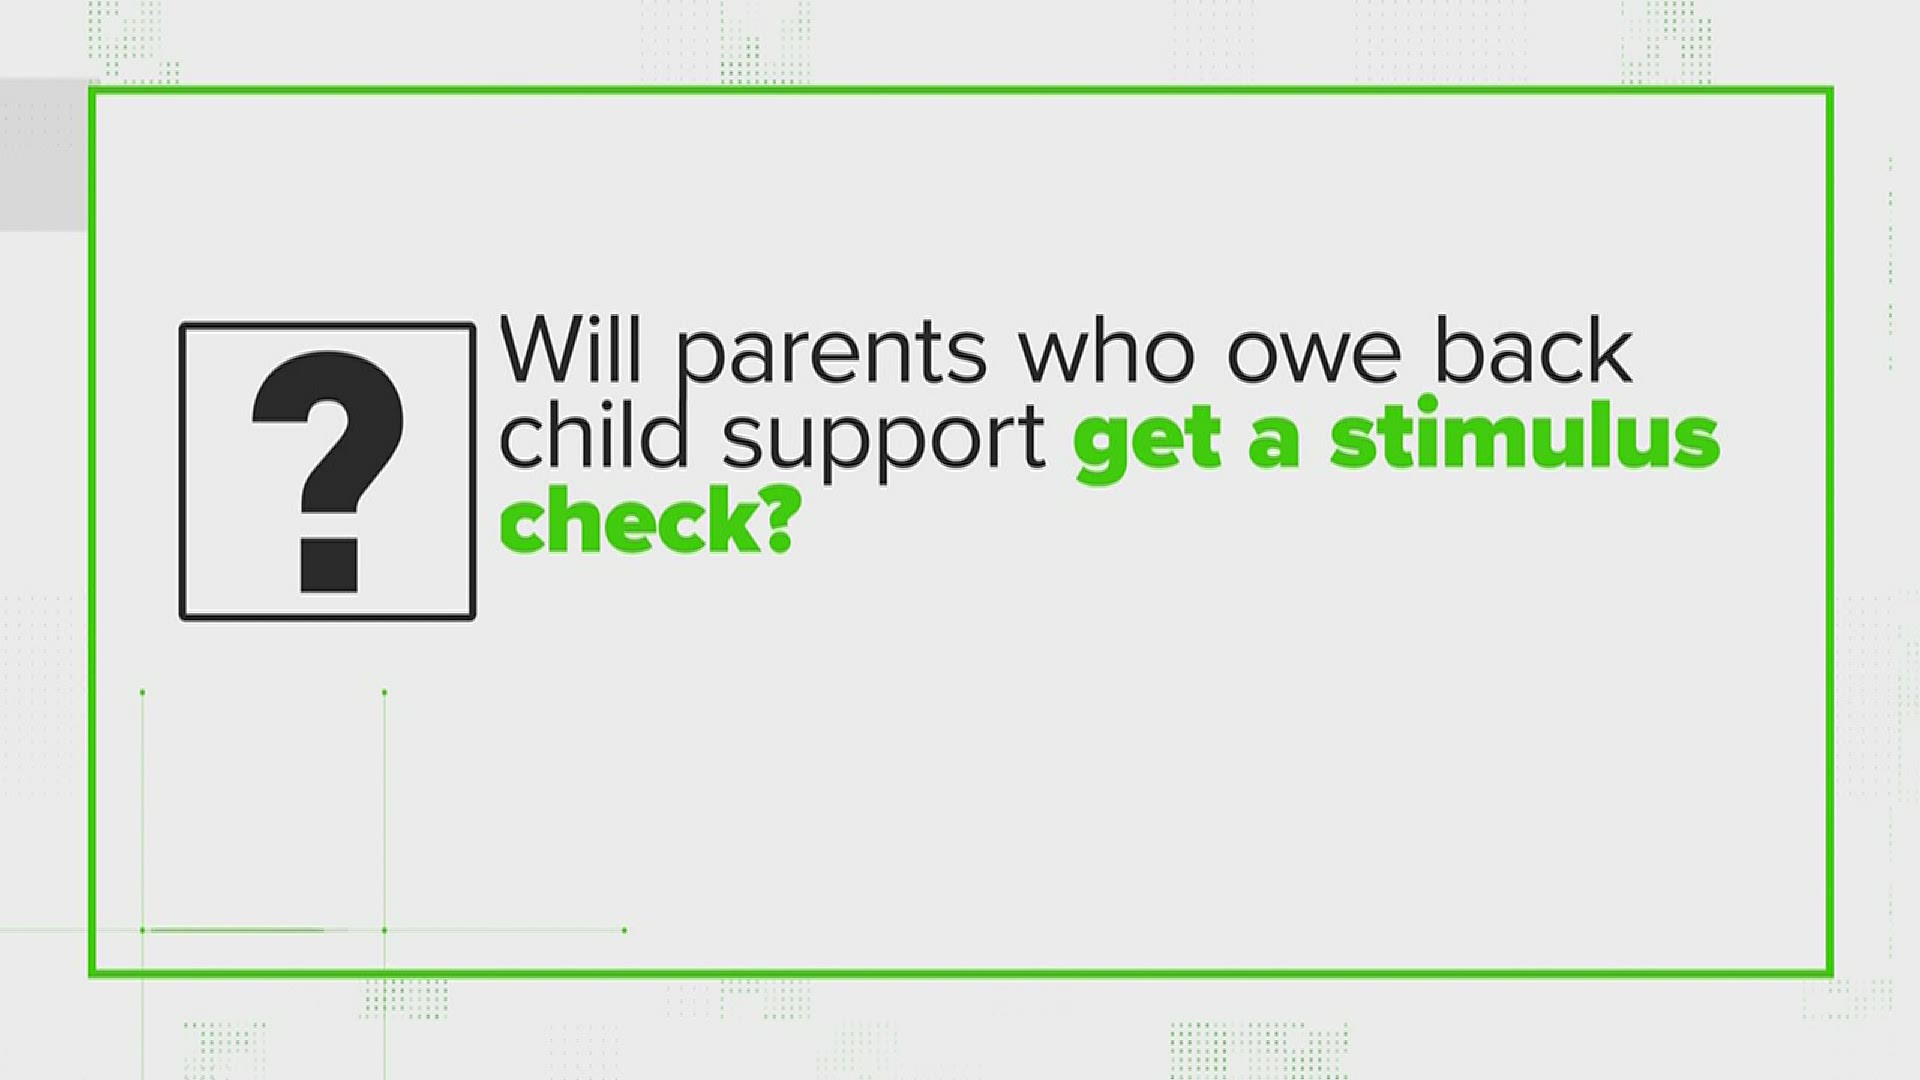 Some of you are concerned you might be missing some of the money you were supposed to get. You've asked if it has anything to do with owing child support.